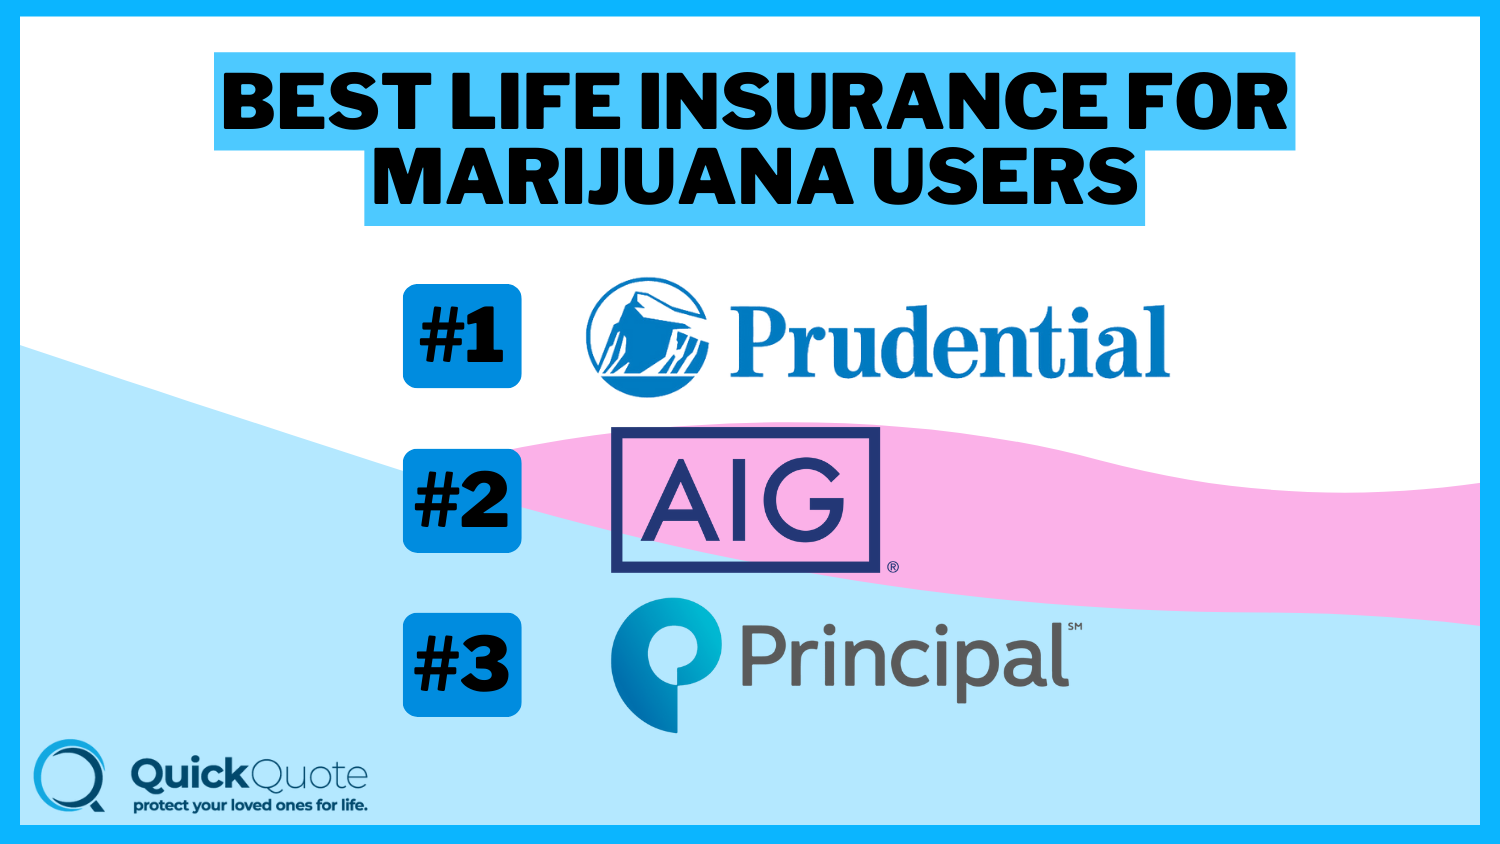 Best Life Insurance Policies for Marijuana Users: Prudential, AIG, and Principal